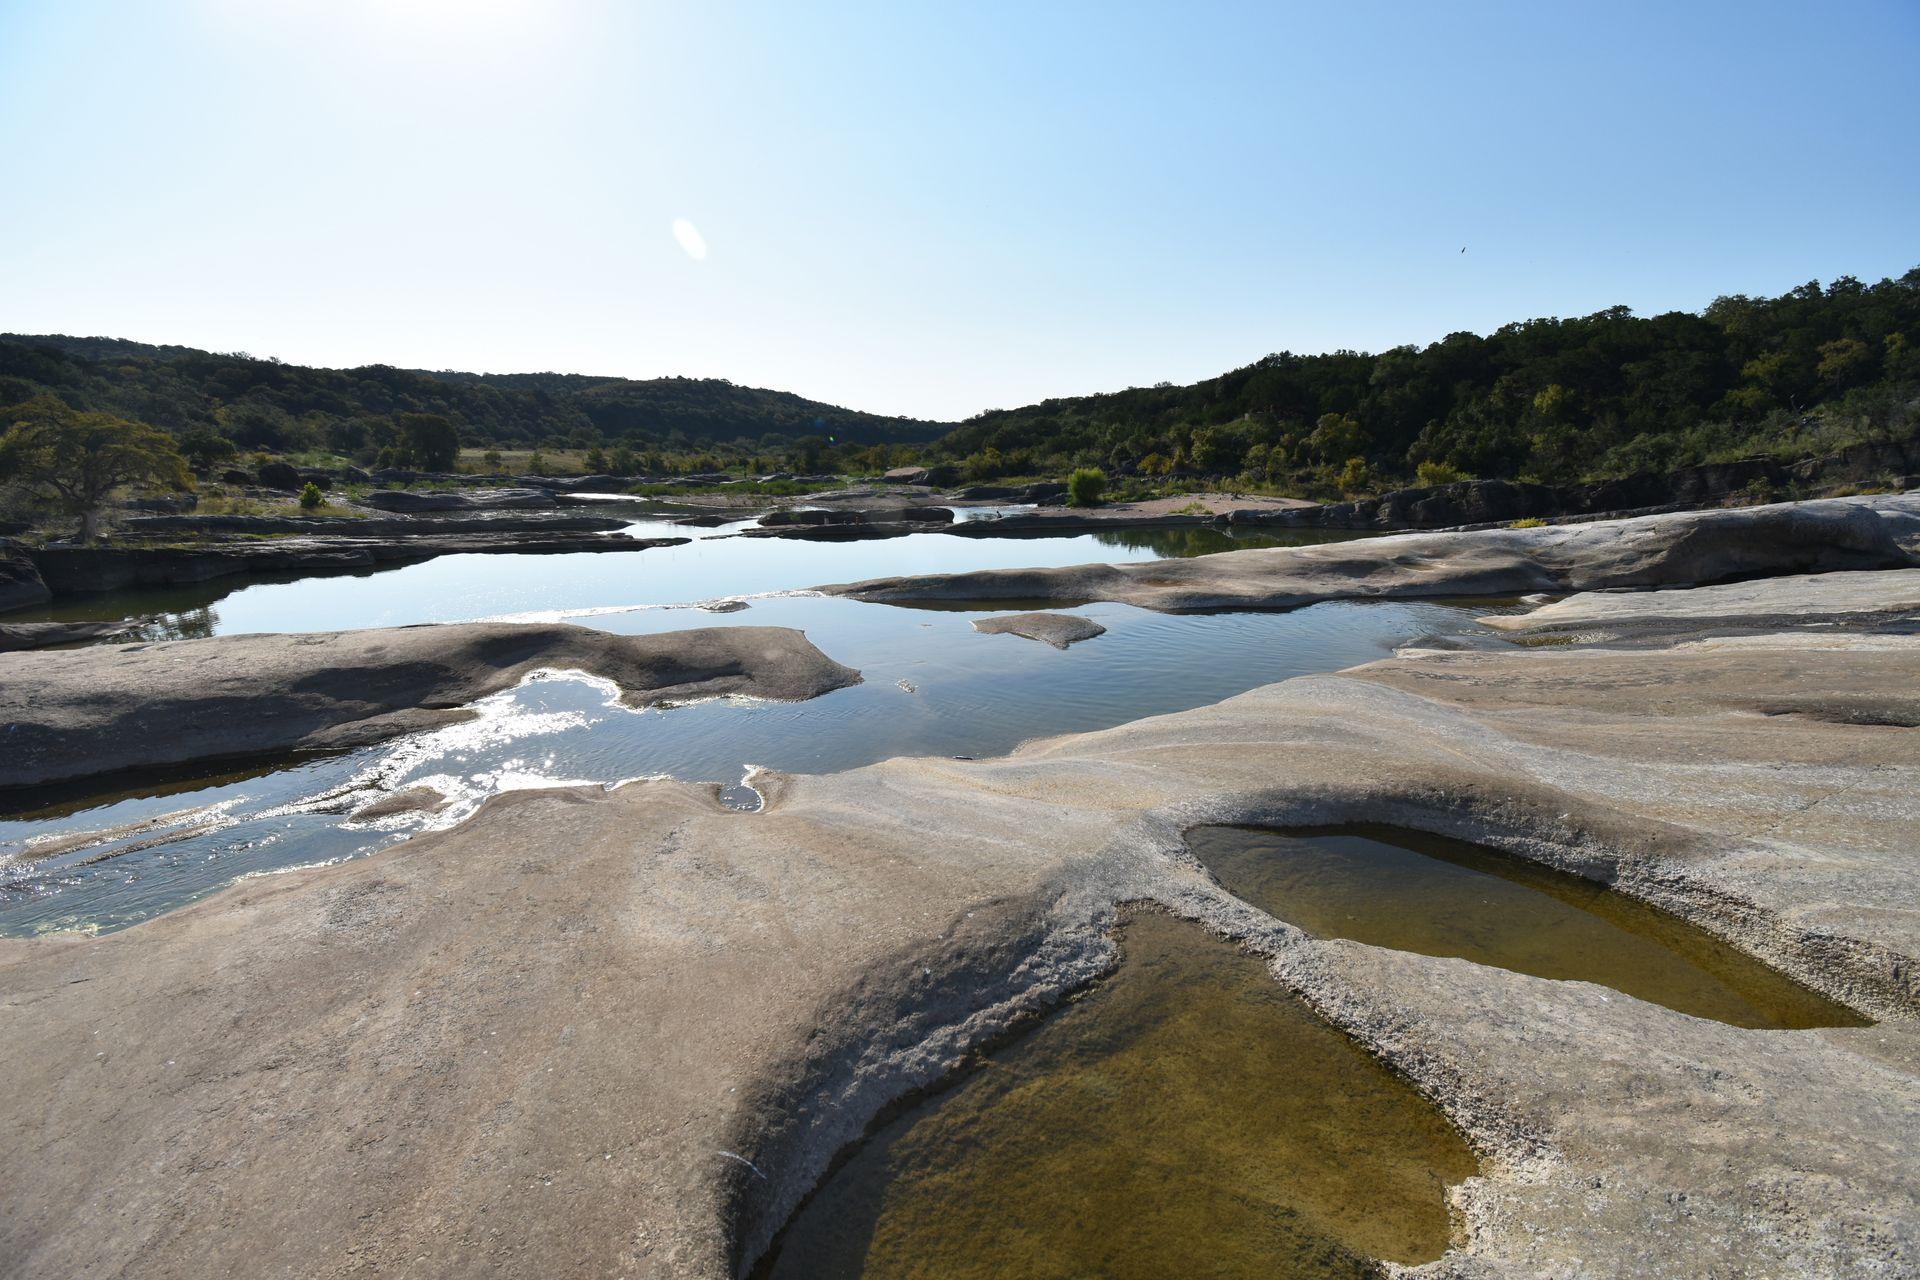 A view of Pedernales Falls, a large rock face with various pools of water